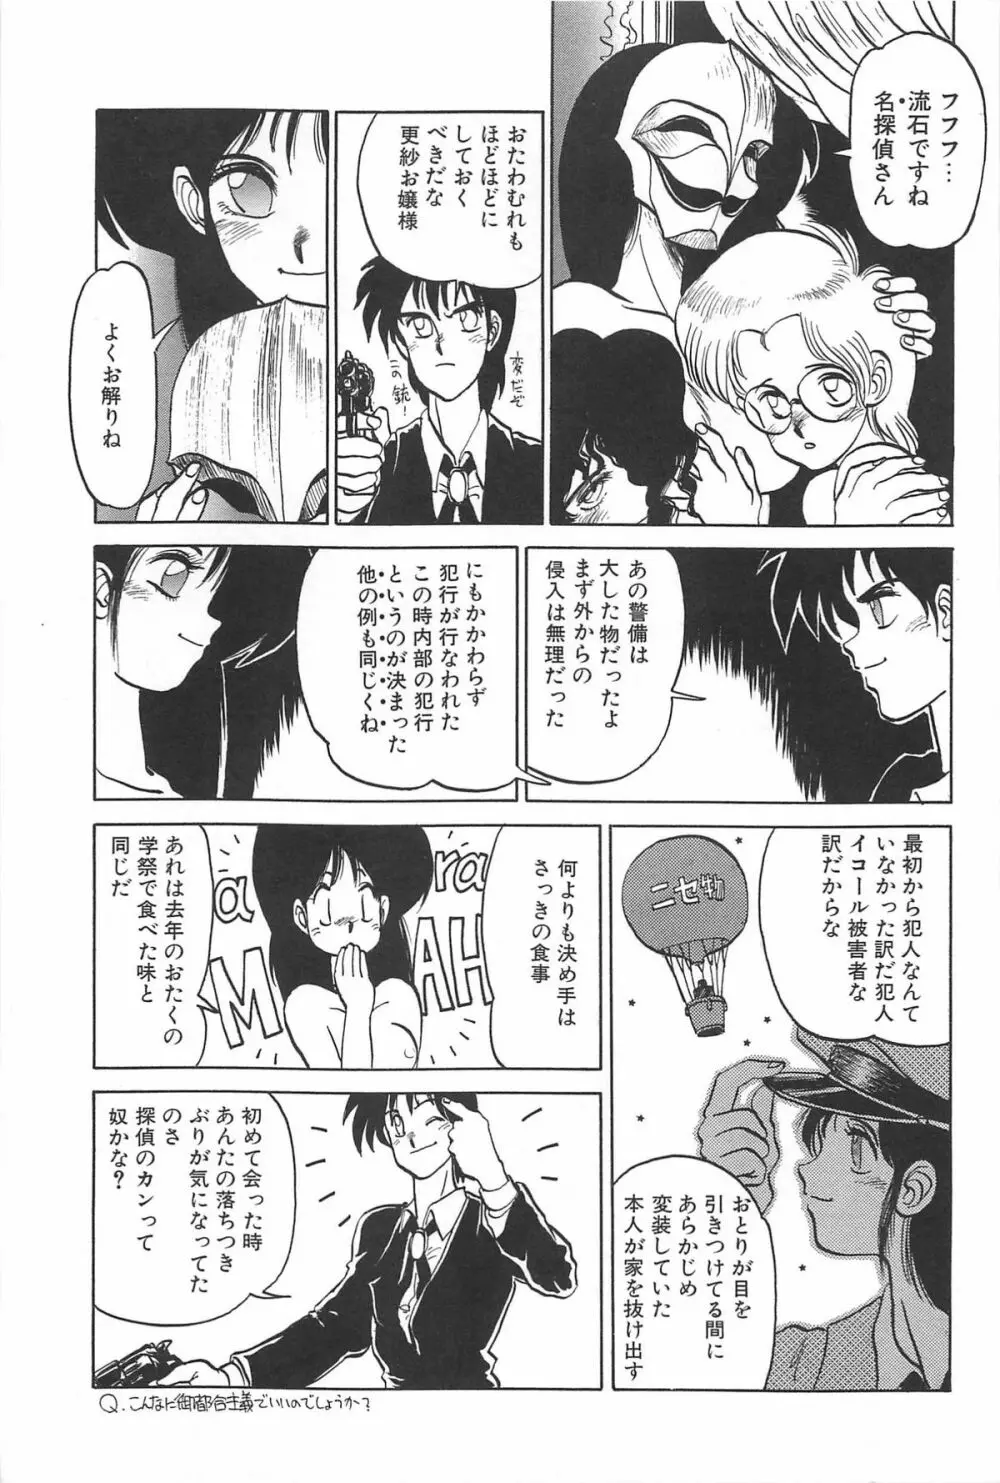 LOVE ME 1995 Page.93